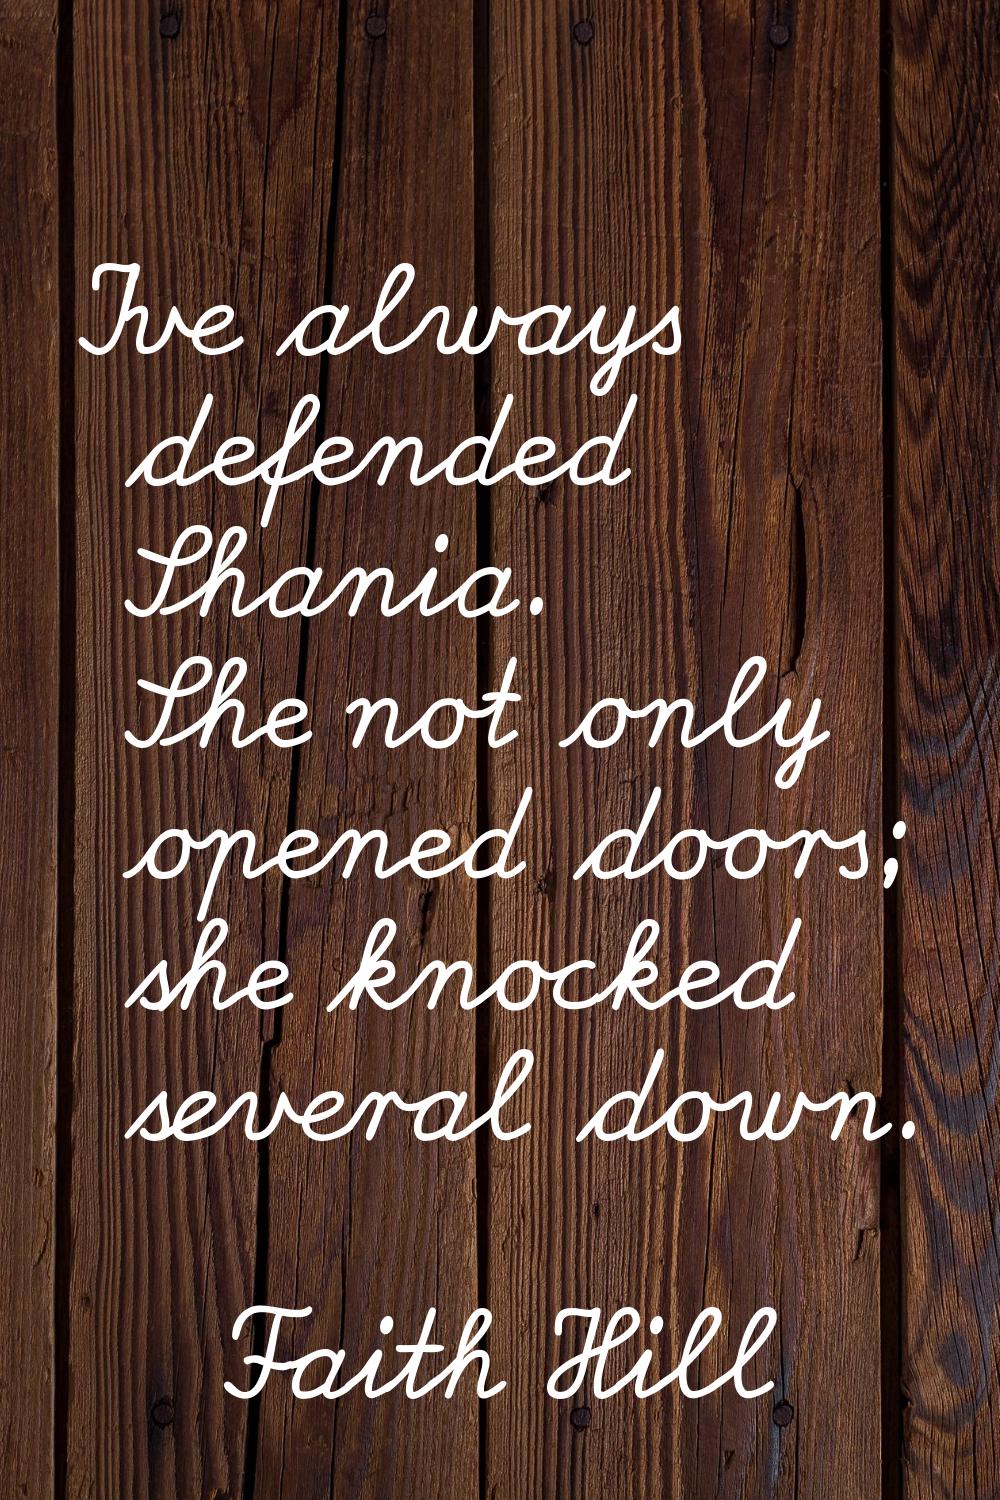 I've always defended Shania. She not only opened doors; she knocked several down.